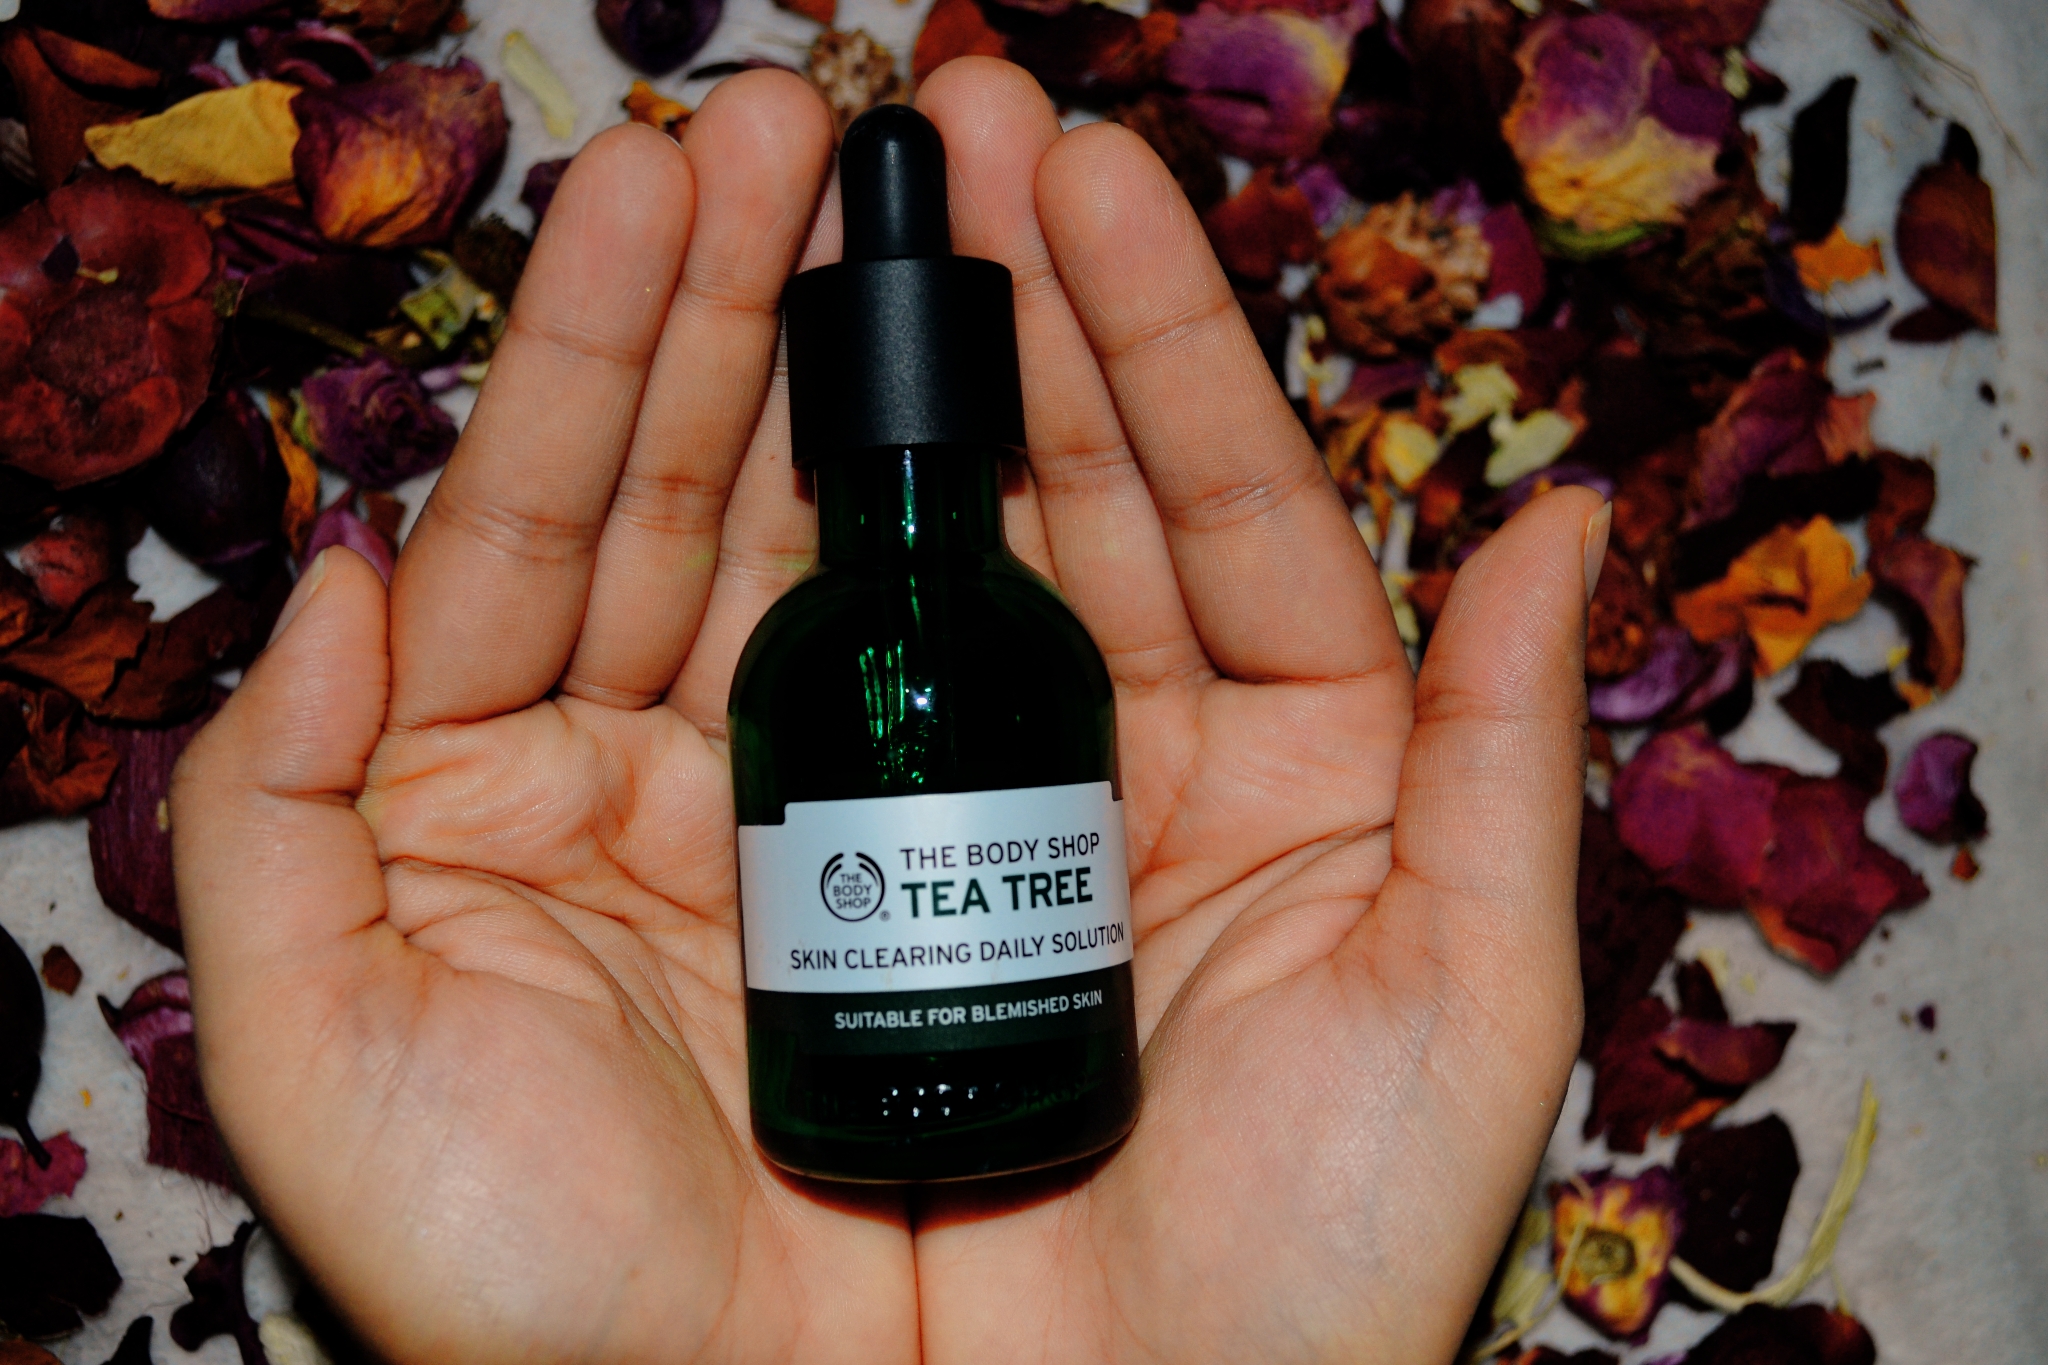 thebeautymascot/the body shop tea tree anti-imperfection daily solution